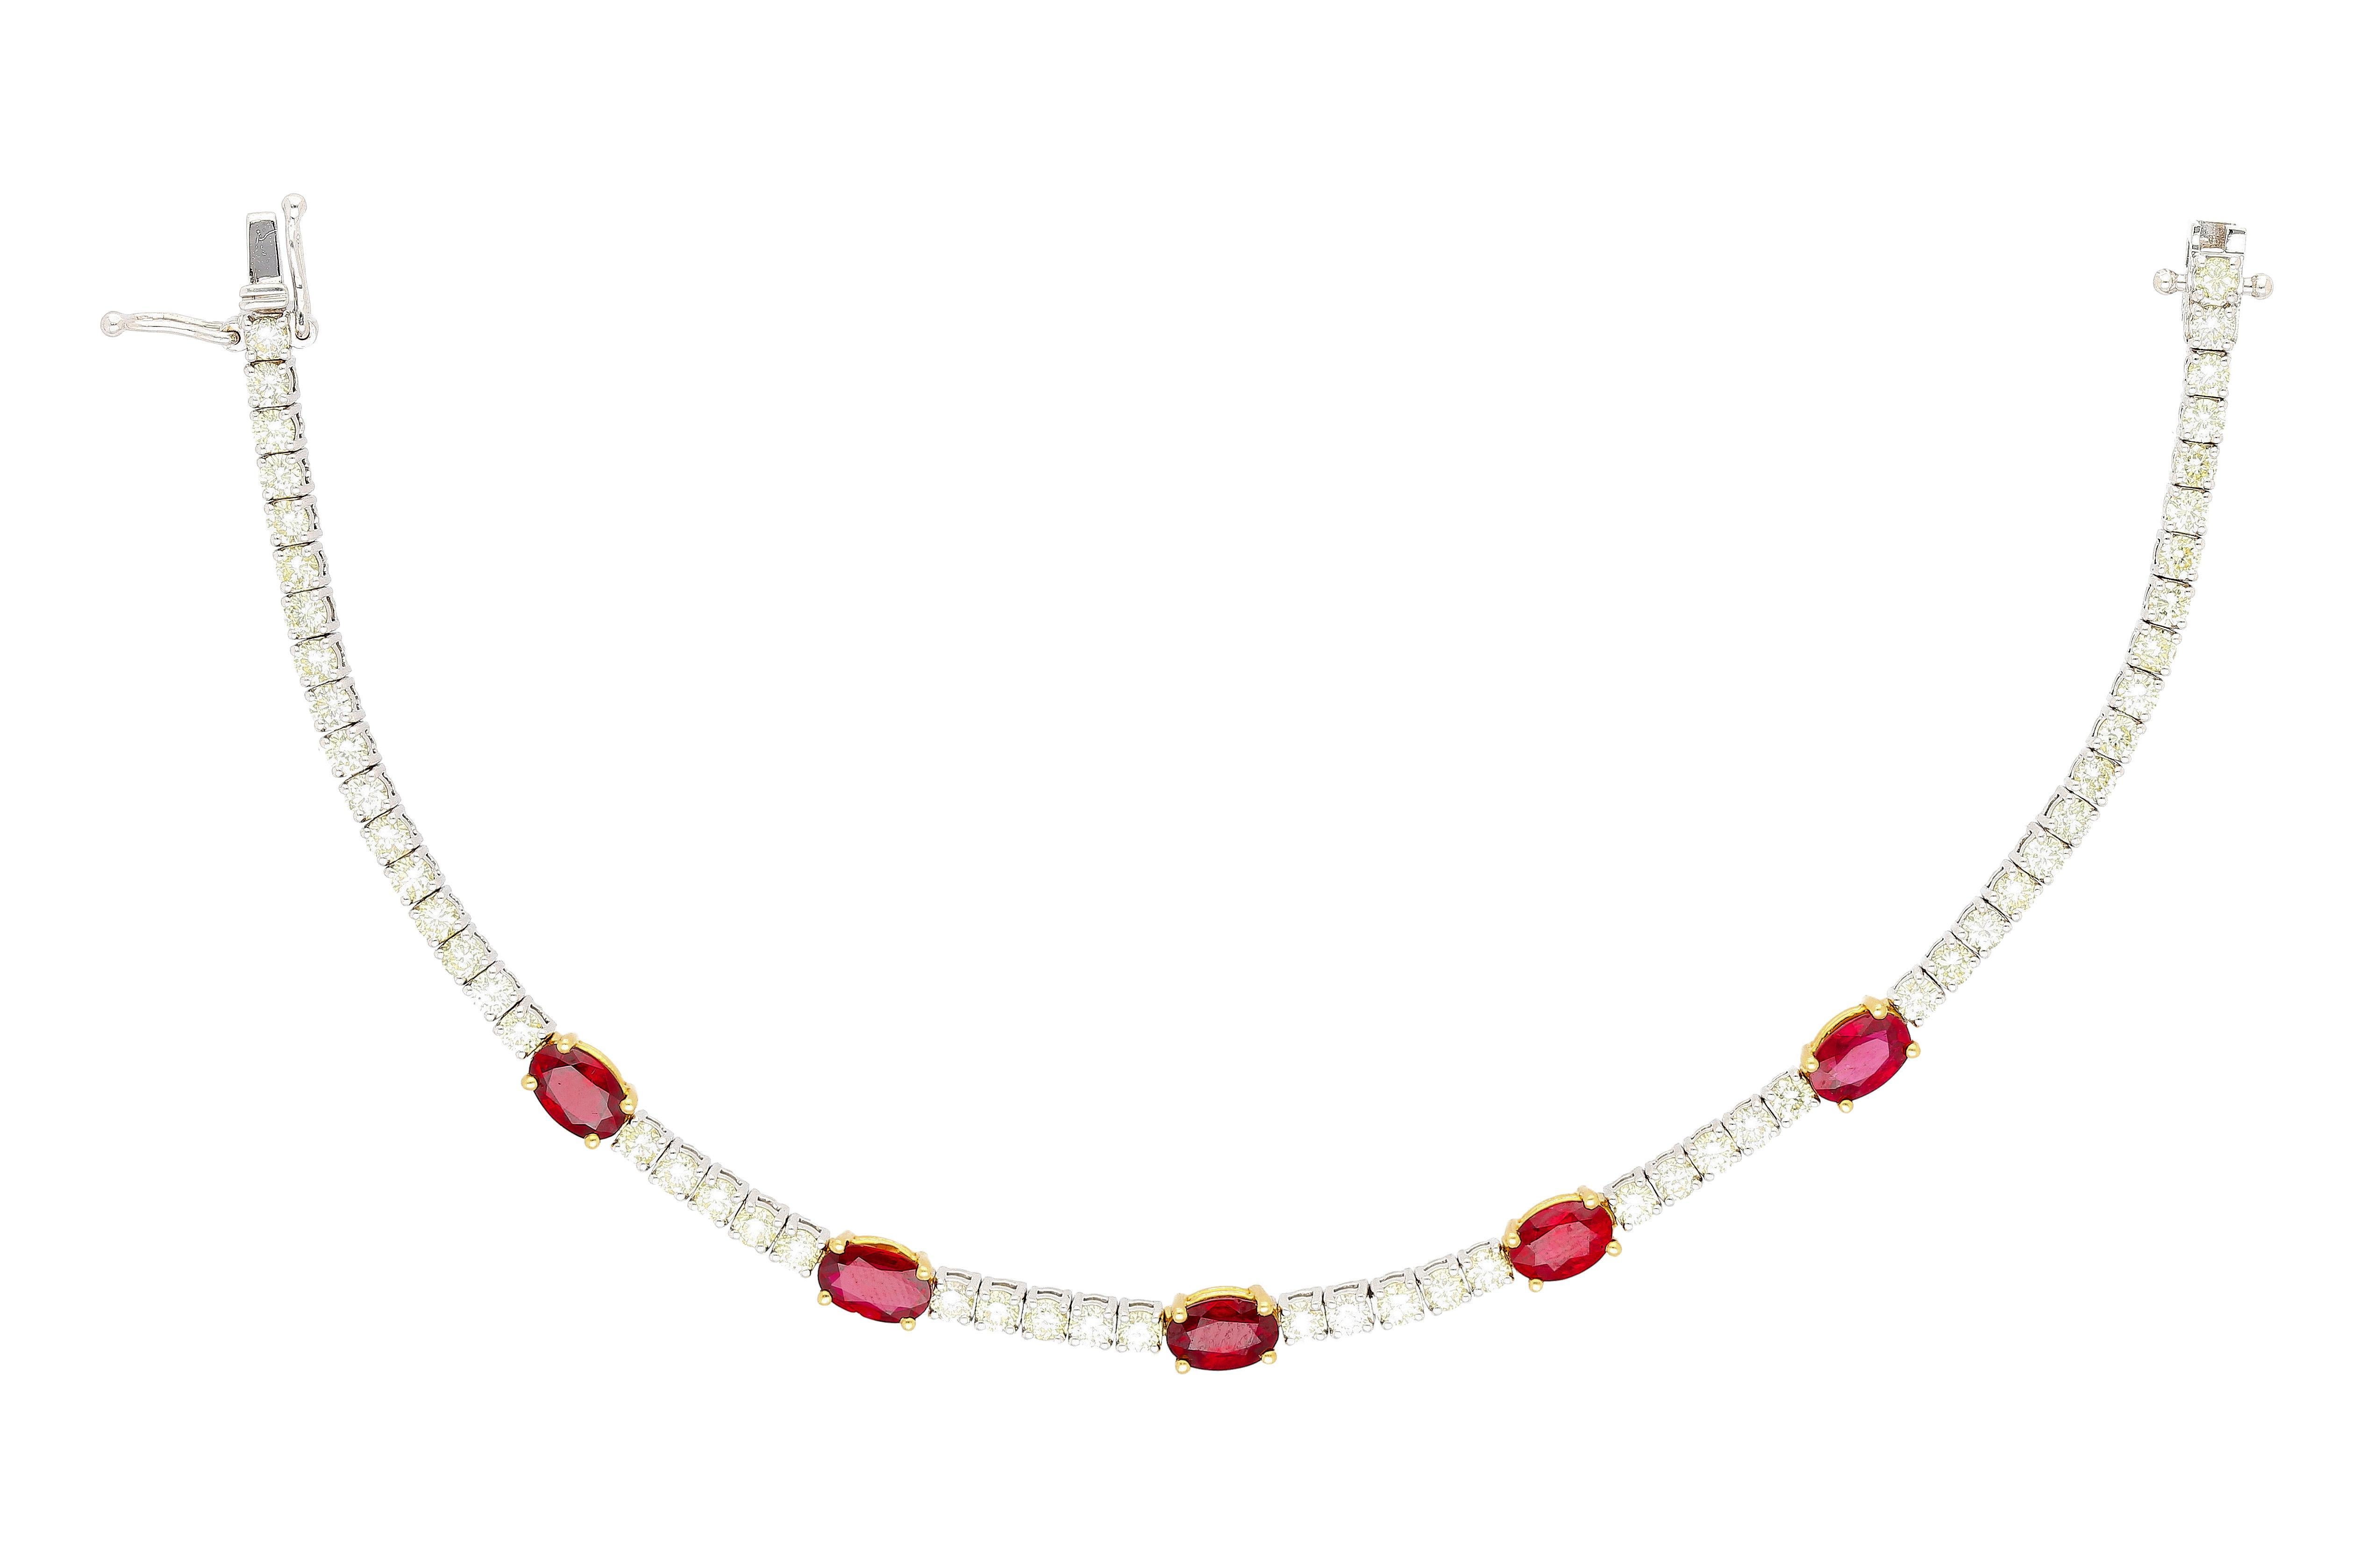 Natural Ruby and  Diamond Tennis Bracelet in Two Tone Gold. 

This two tone gold tennis bracelet, is crafted from both 18k yellow and white gold. It features 5 oval-cut natural red ruby stones, weighing 2.91 carats total. The rubies are paired with